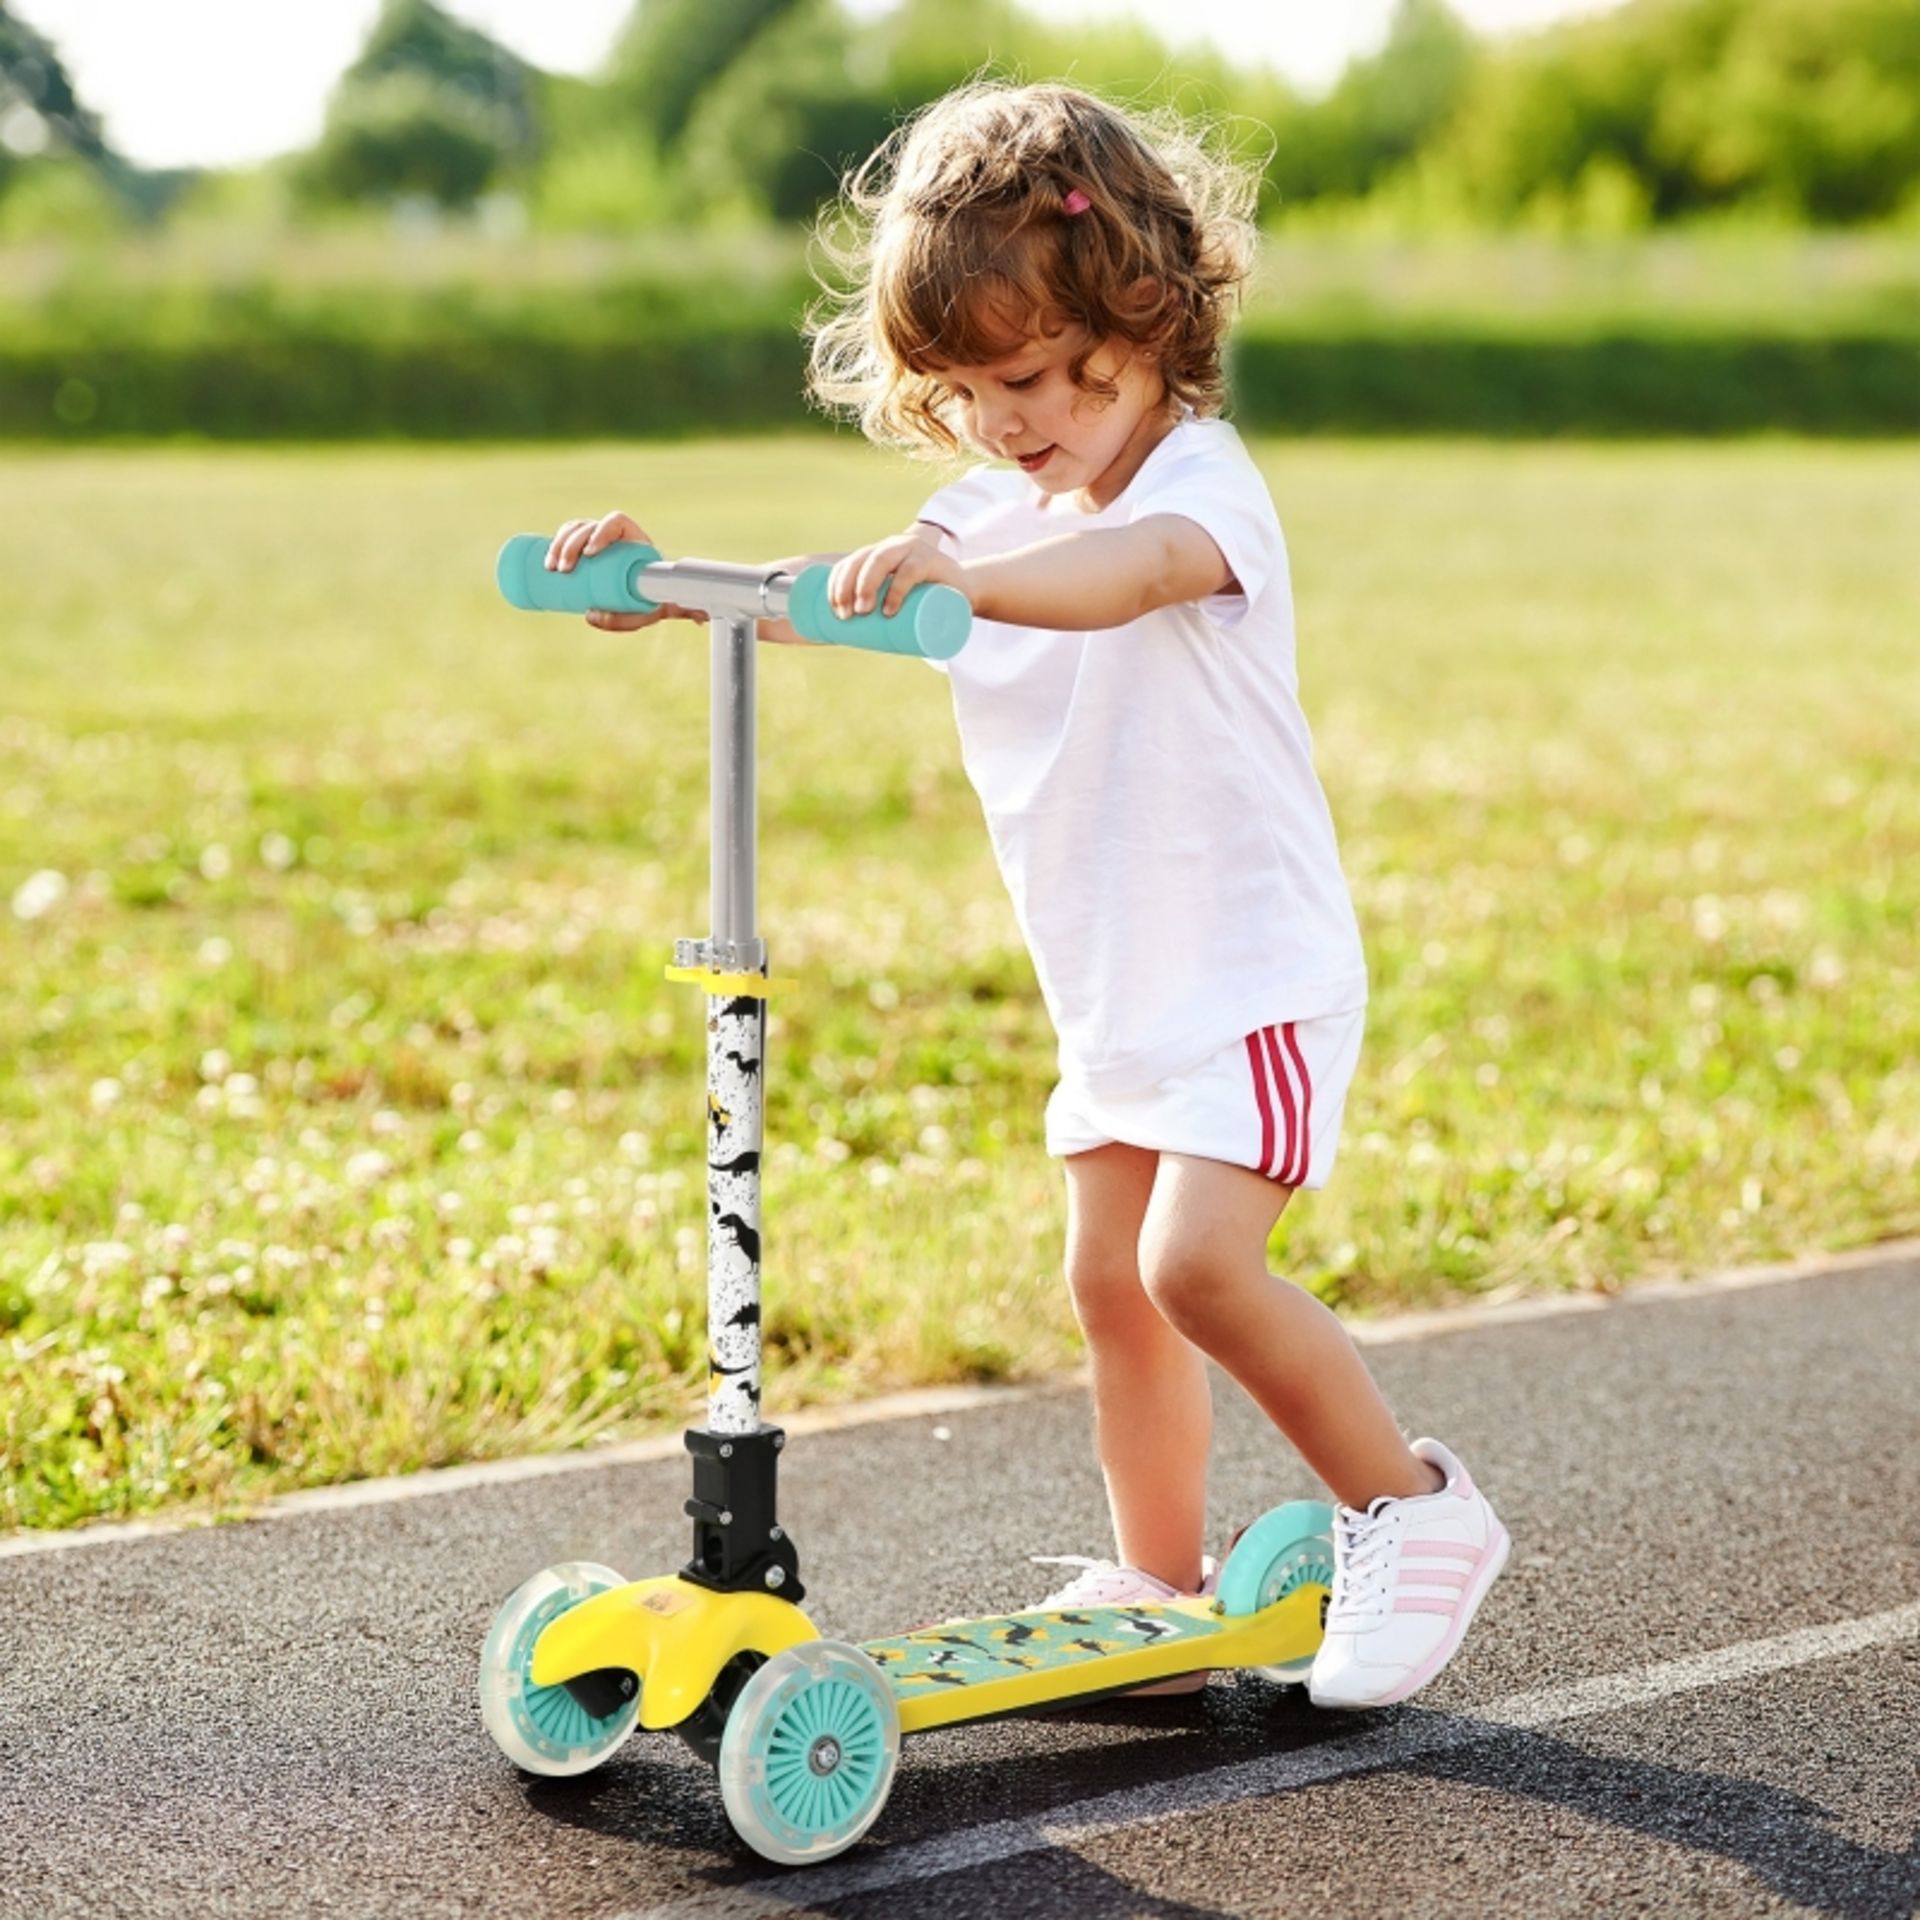 RPP £39.99 -HOMCOM Foldable Scooter for Kids with 3 Wheel Adjustable Height Flashing Wheels